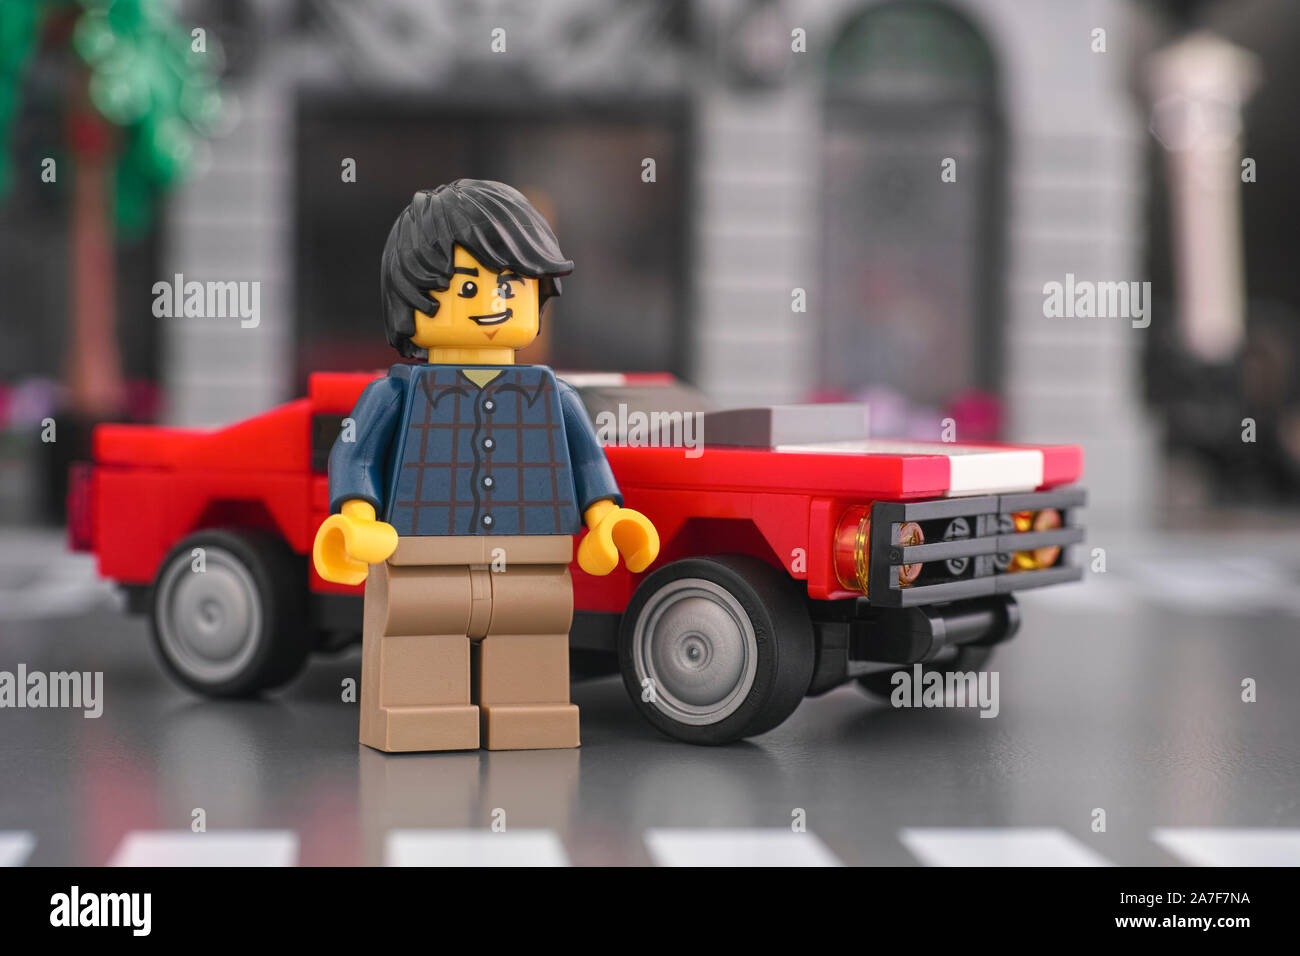 Tambov, Russian Federation - October 18, 2019 Lego minifigure standing in front of a muscle car. Stock Photo